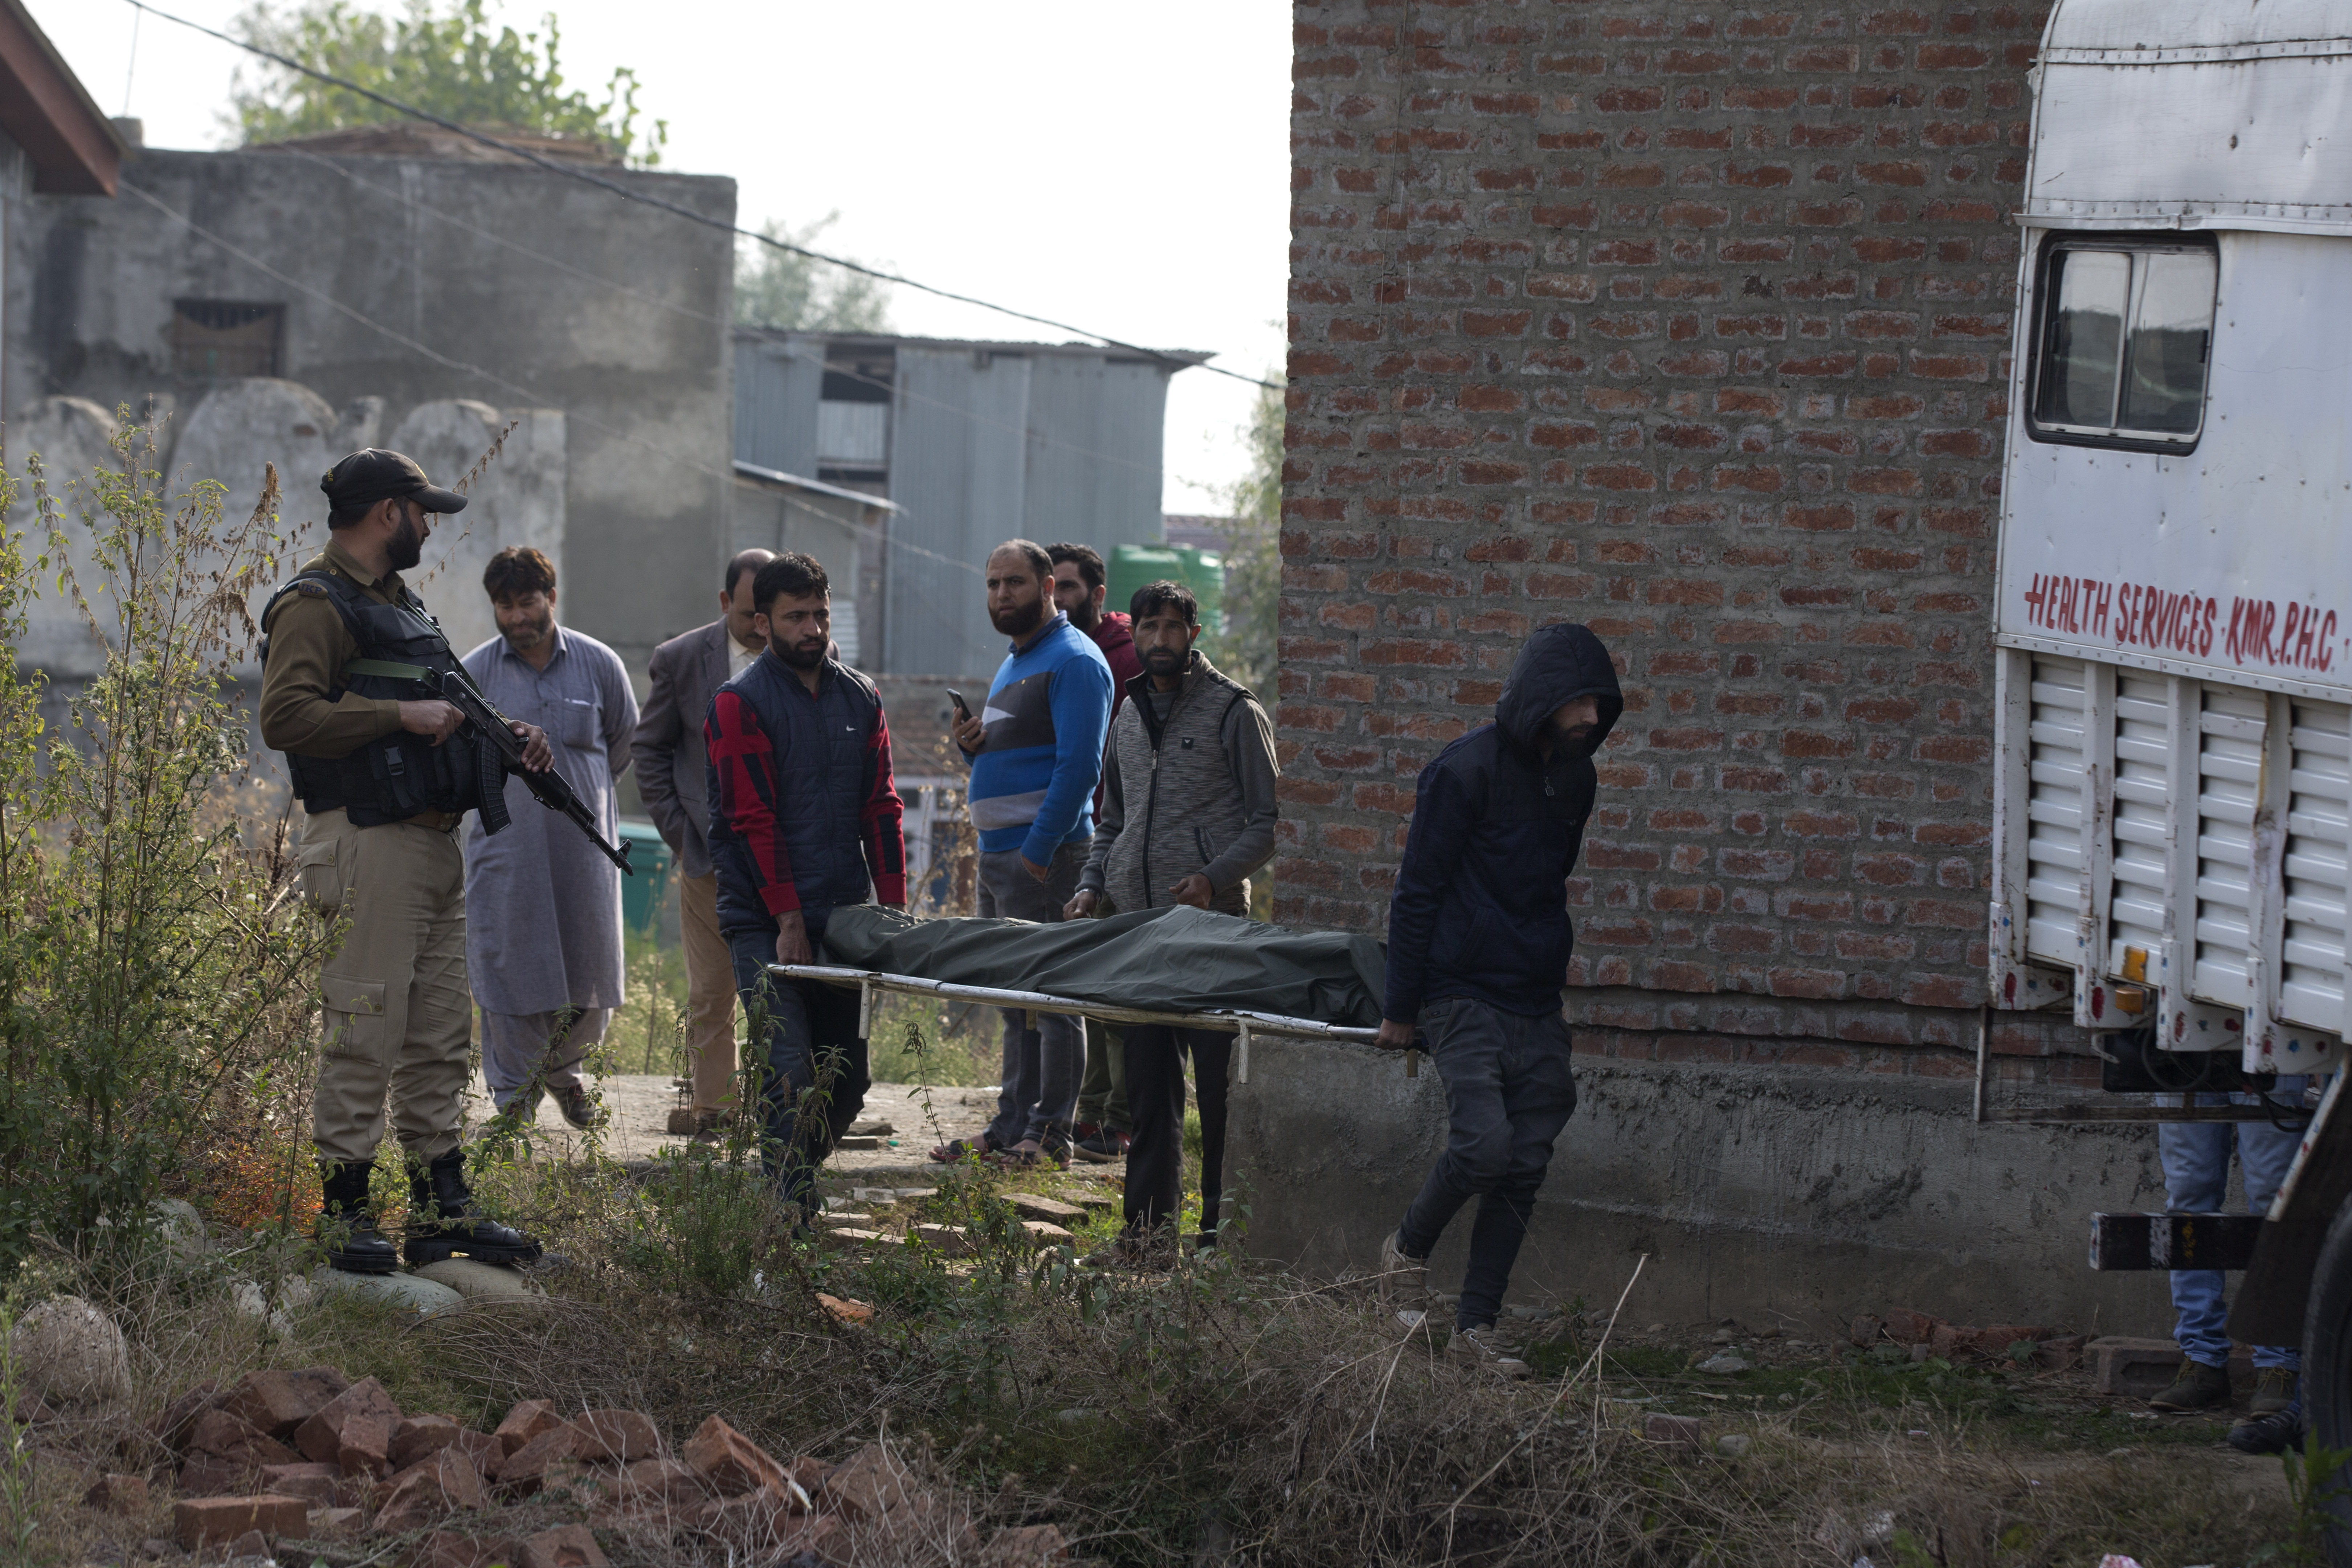 Kashmiri villagers carry the body of a migrant worker who was shot dead by gunmen towards a waiting ambulance outside a hospital in Kulgam, on October 30, 2019